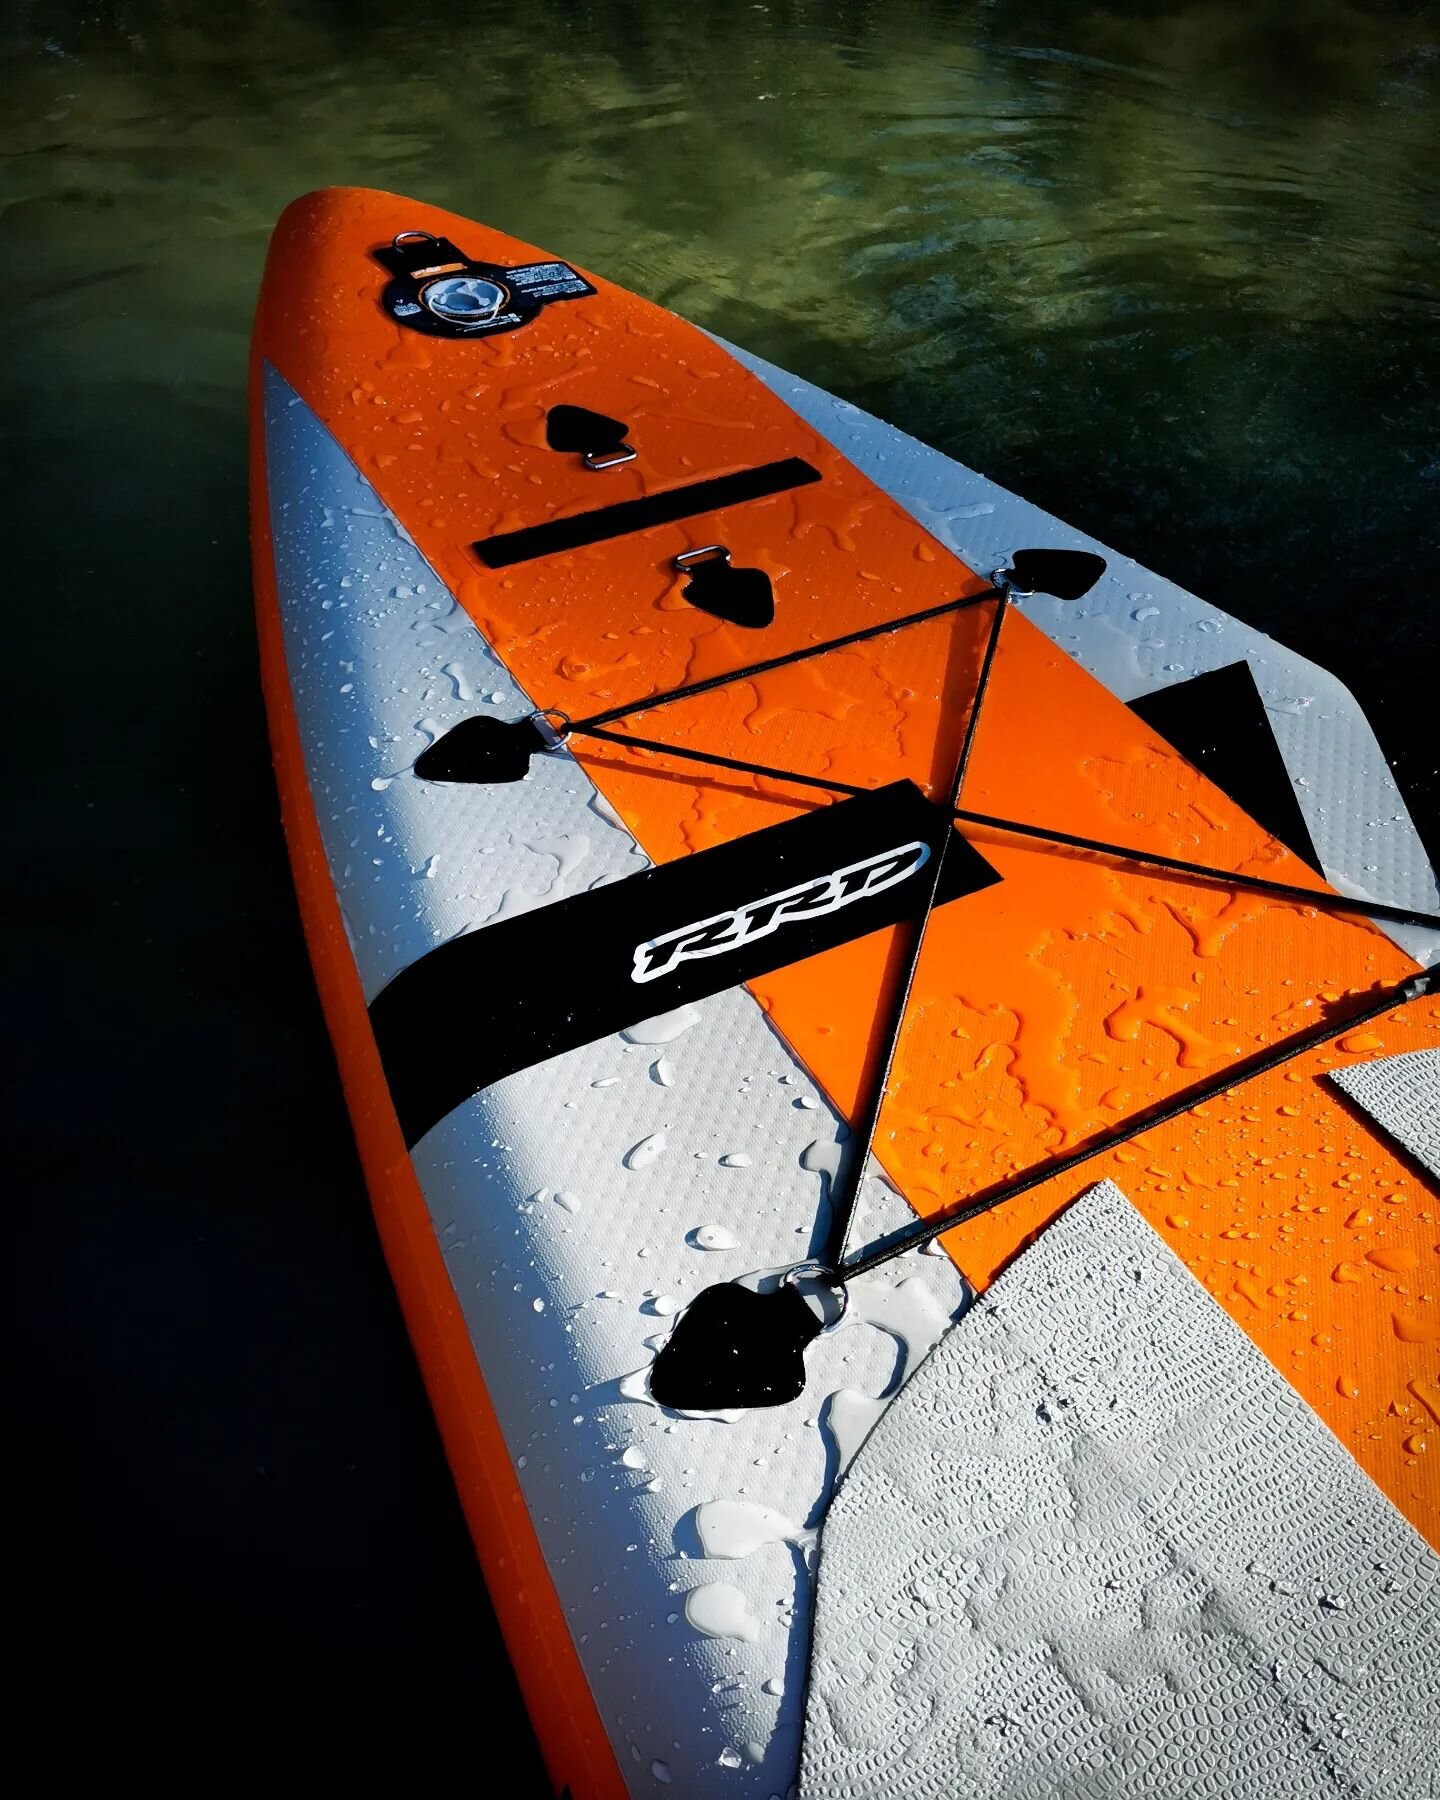 Spring is in the air and it's time to level up your SUP game with our New Board Feature 💁&zwj;♂️

Meet the 
🔶RRD Air EVO Cruiser🔶

🔸Tapered nose and back for maximum speed retention

🔸Flatter profile increases glide

🔸Perfect choice for lakes a